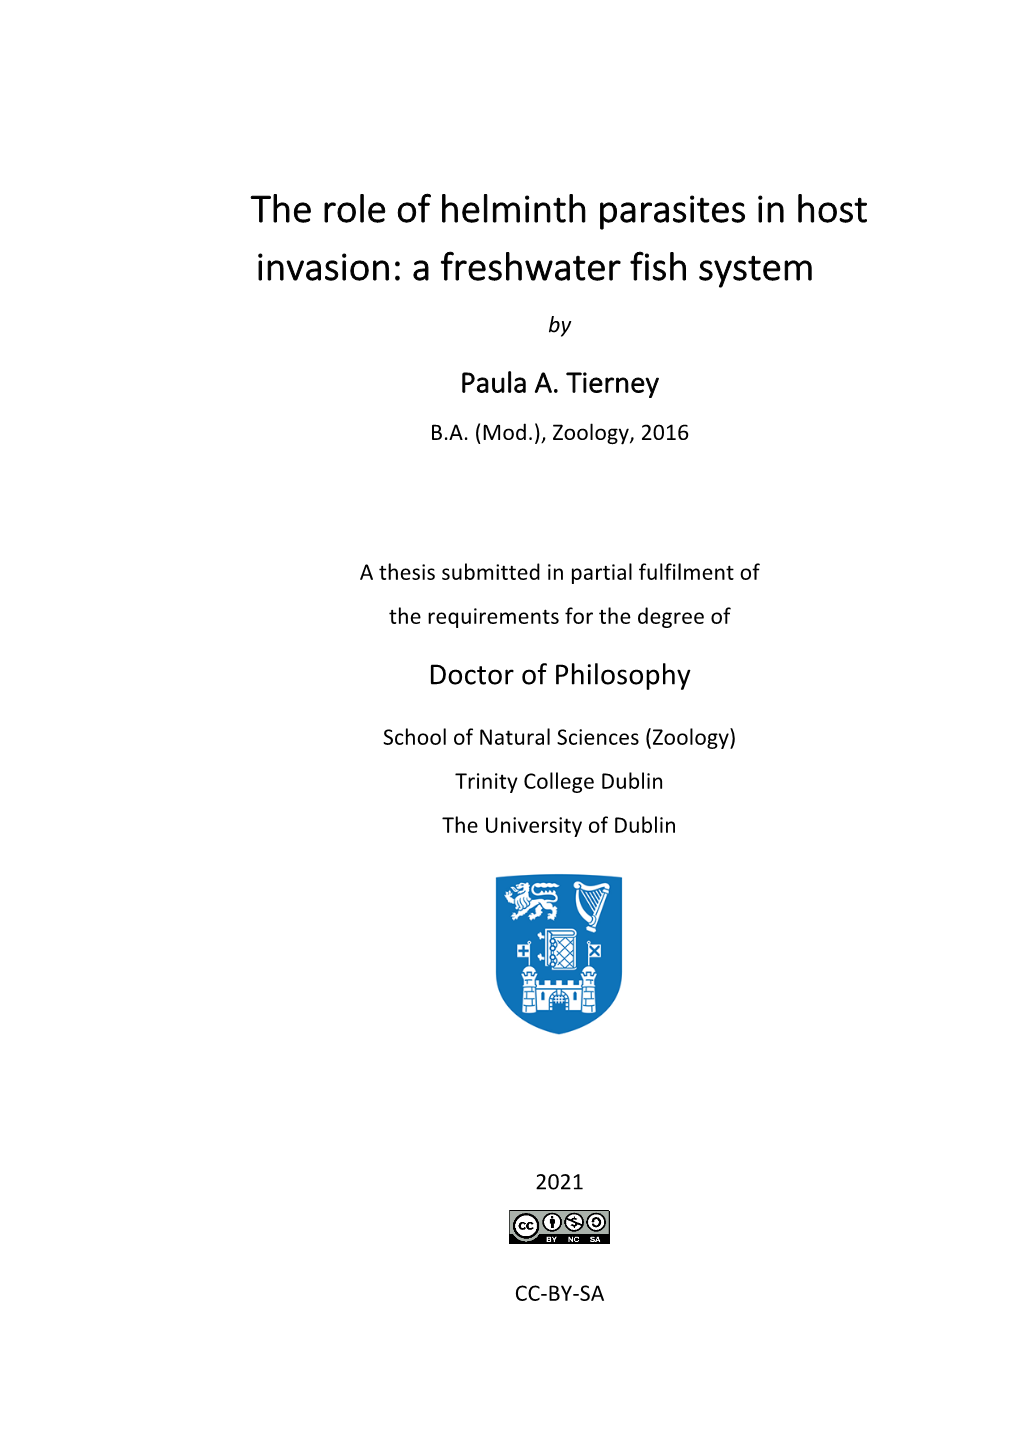 The Role of Helminth Parasites in Host Invasion: a Freshwater Fish System